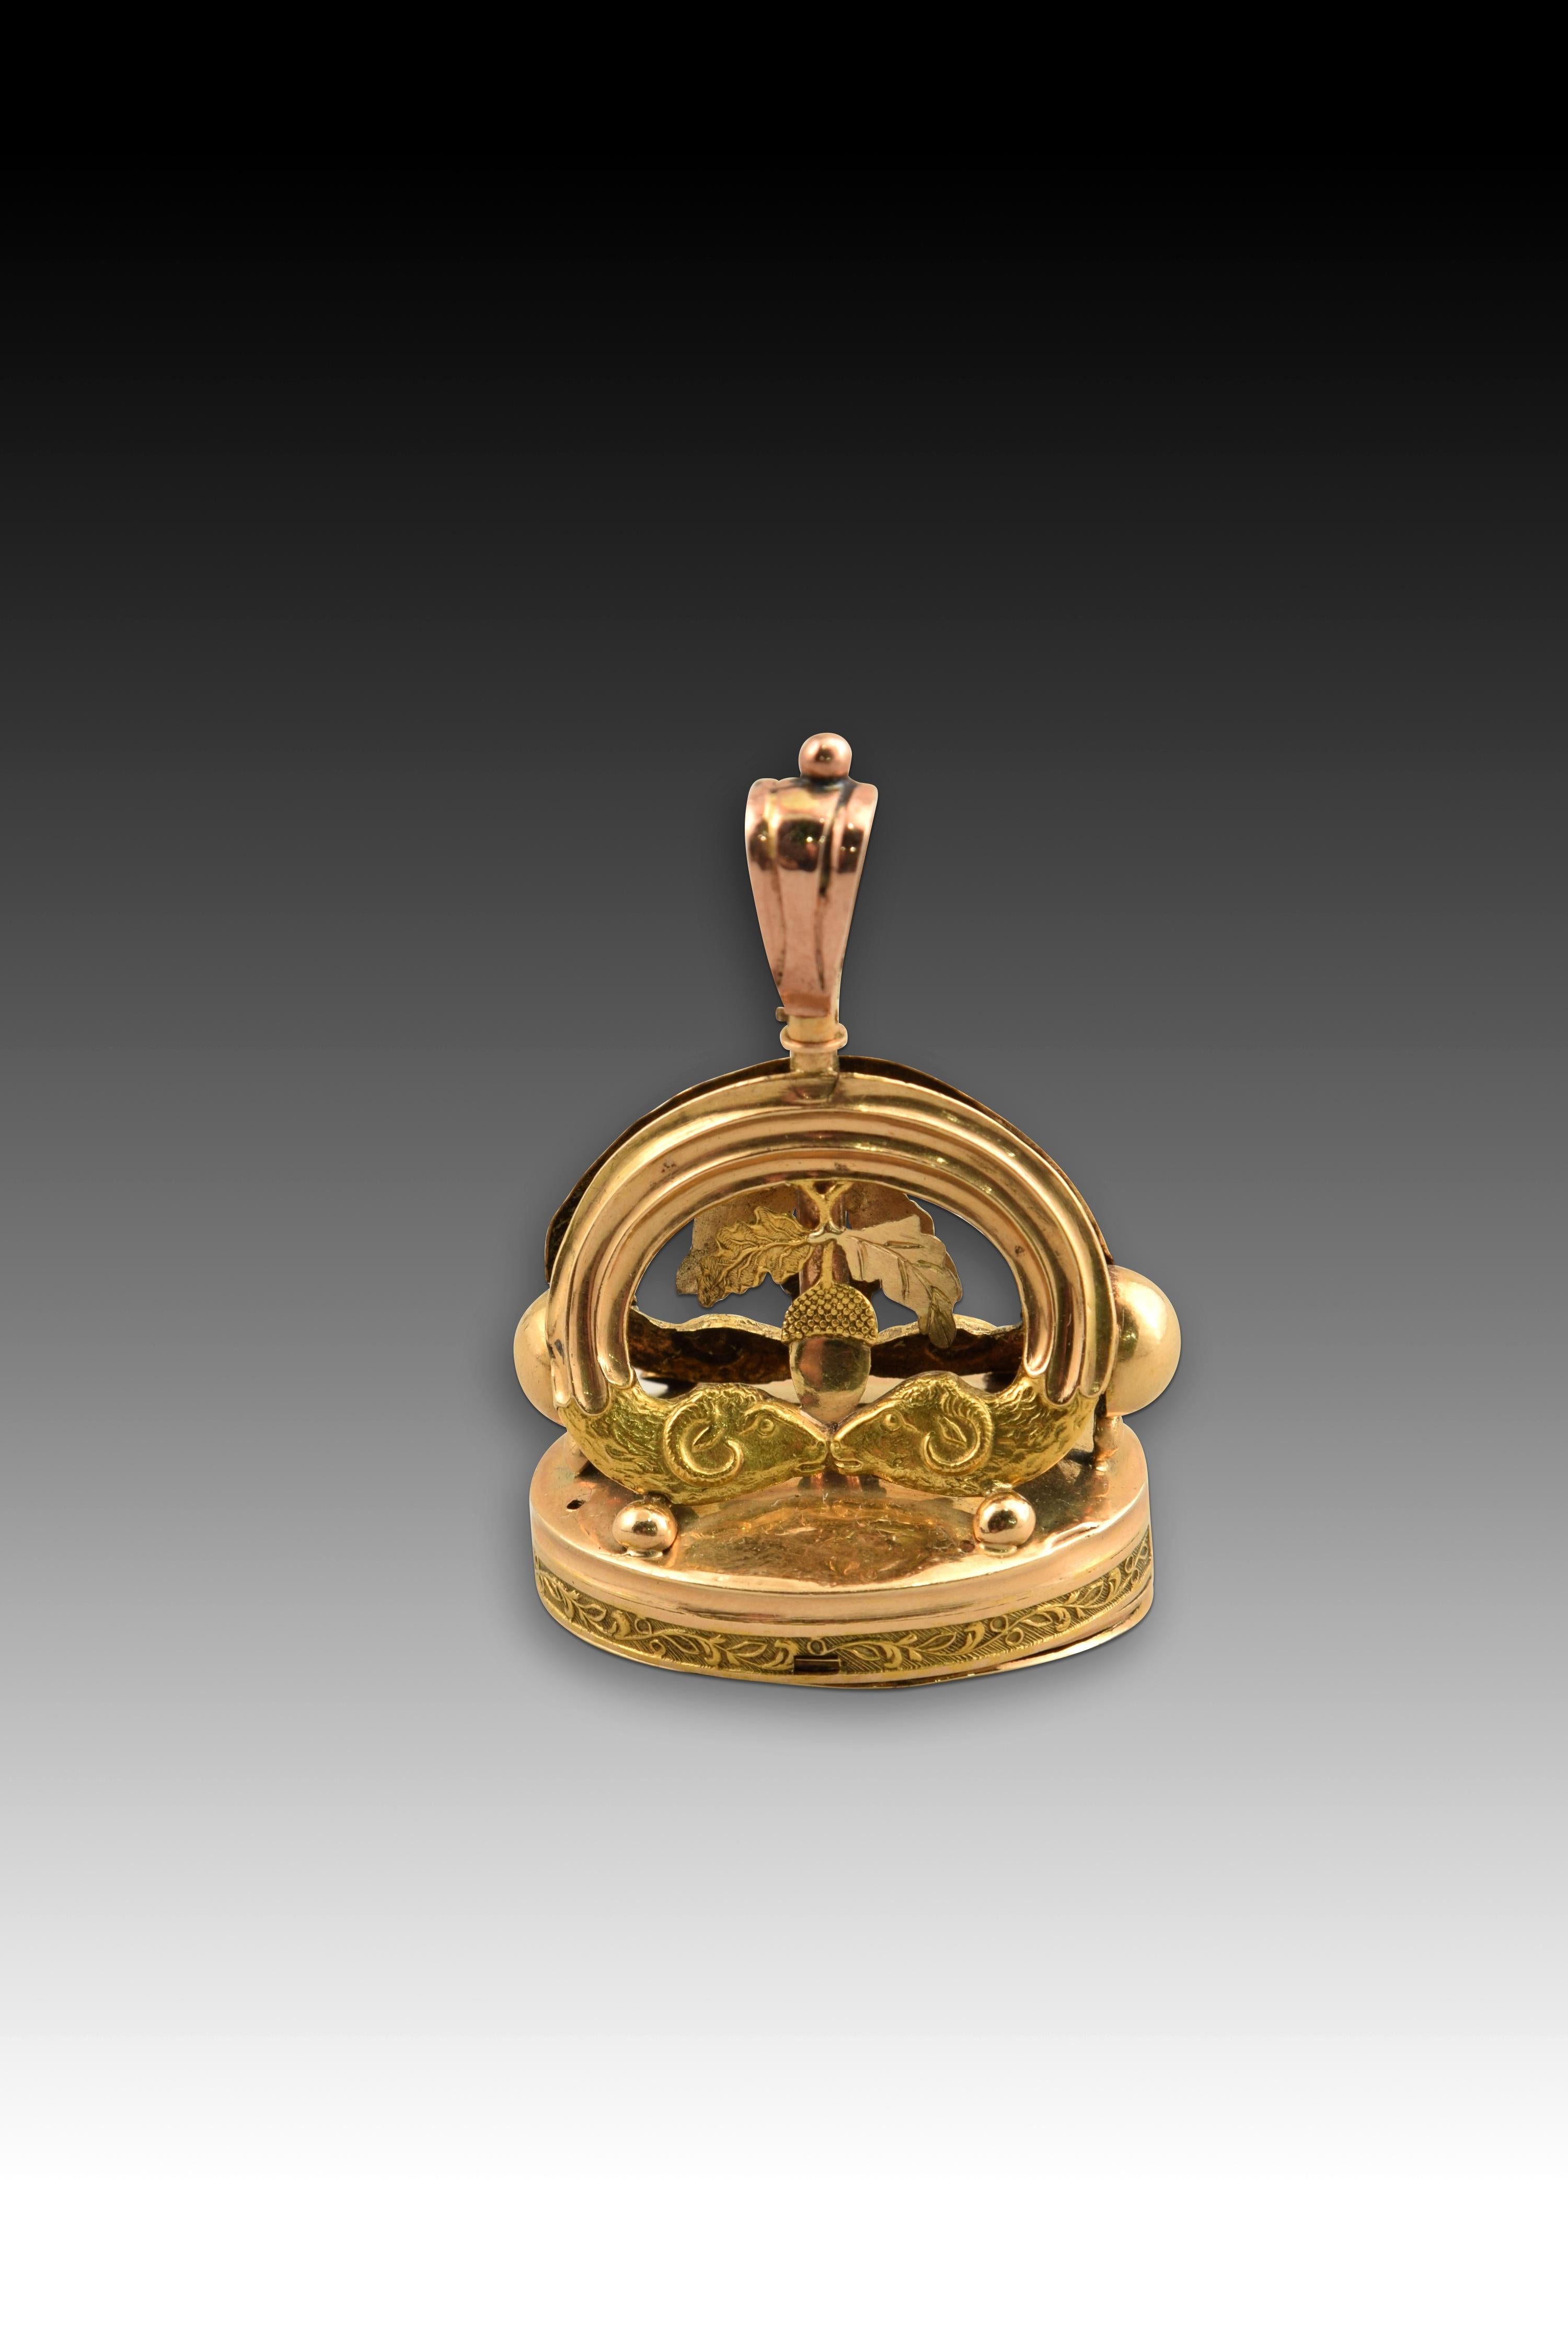 Other Swiss Gold Musical Fob Seal, Circa 1820 For Sale